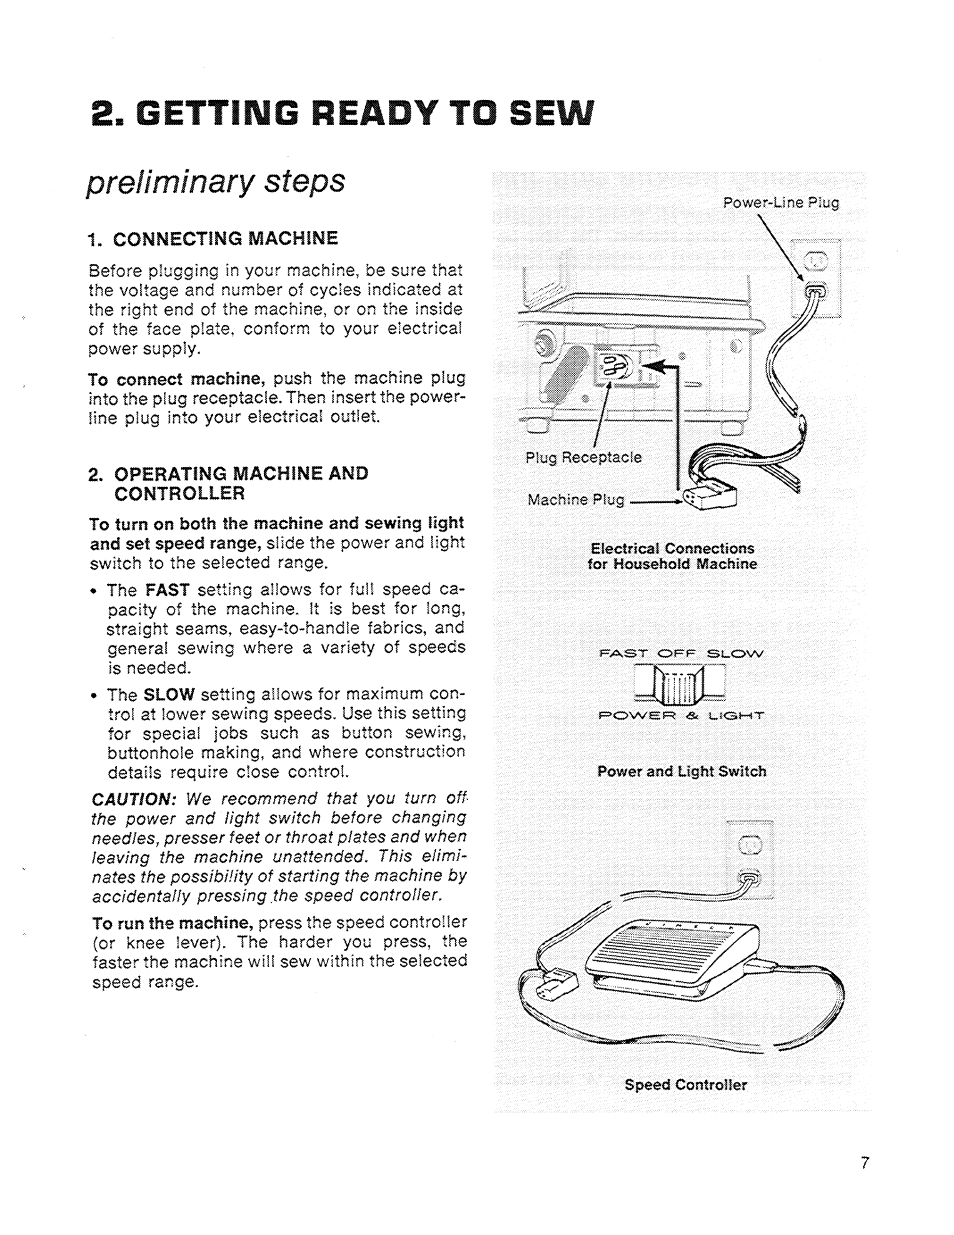 Preliminary steps, Connecting machine, Operating machine and controller | Getting ready to sew | SINGER 714 Graduate User Manual | Page 9 / 52